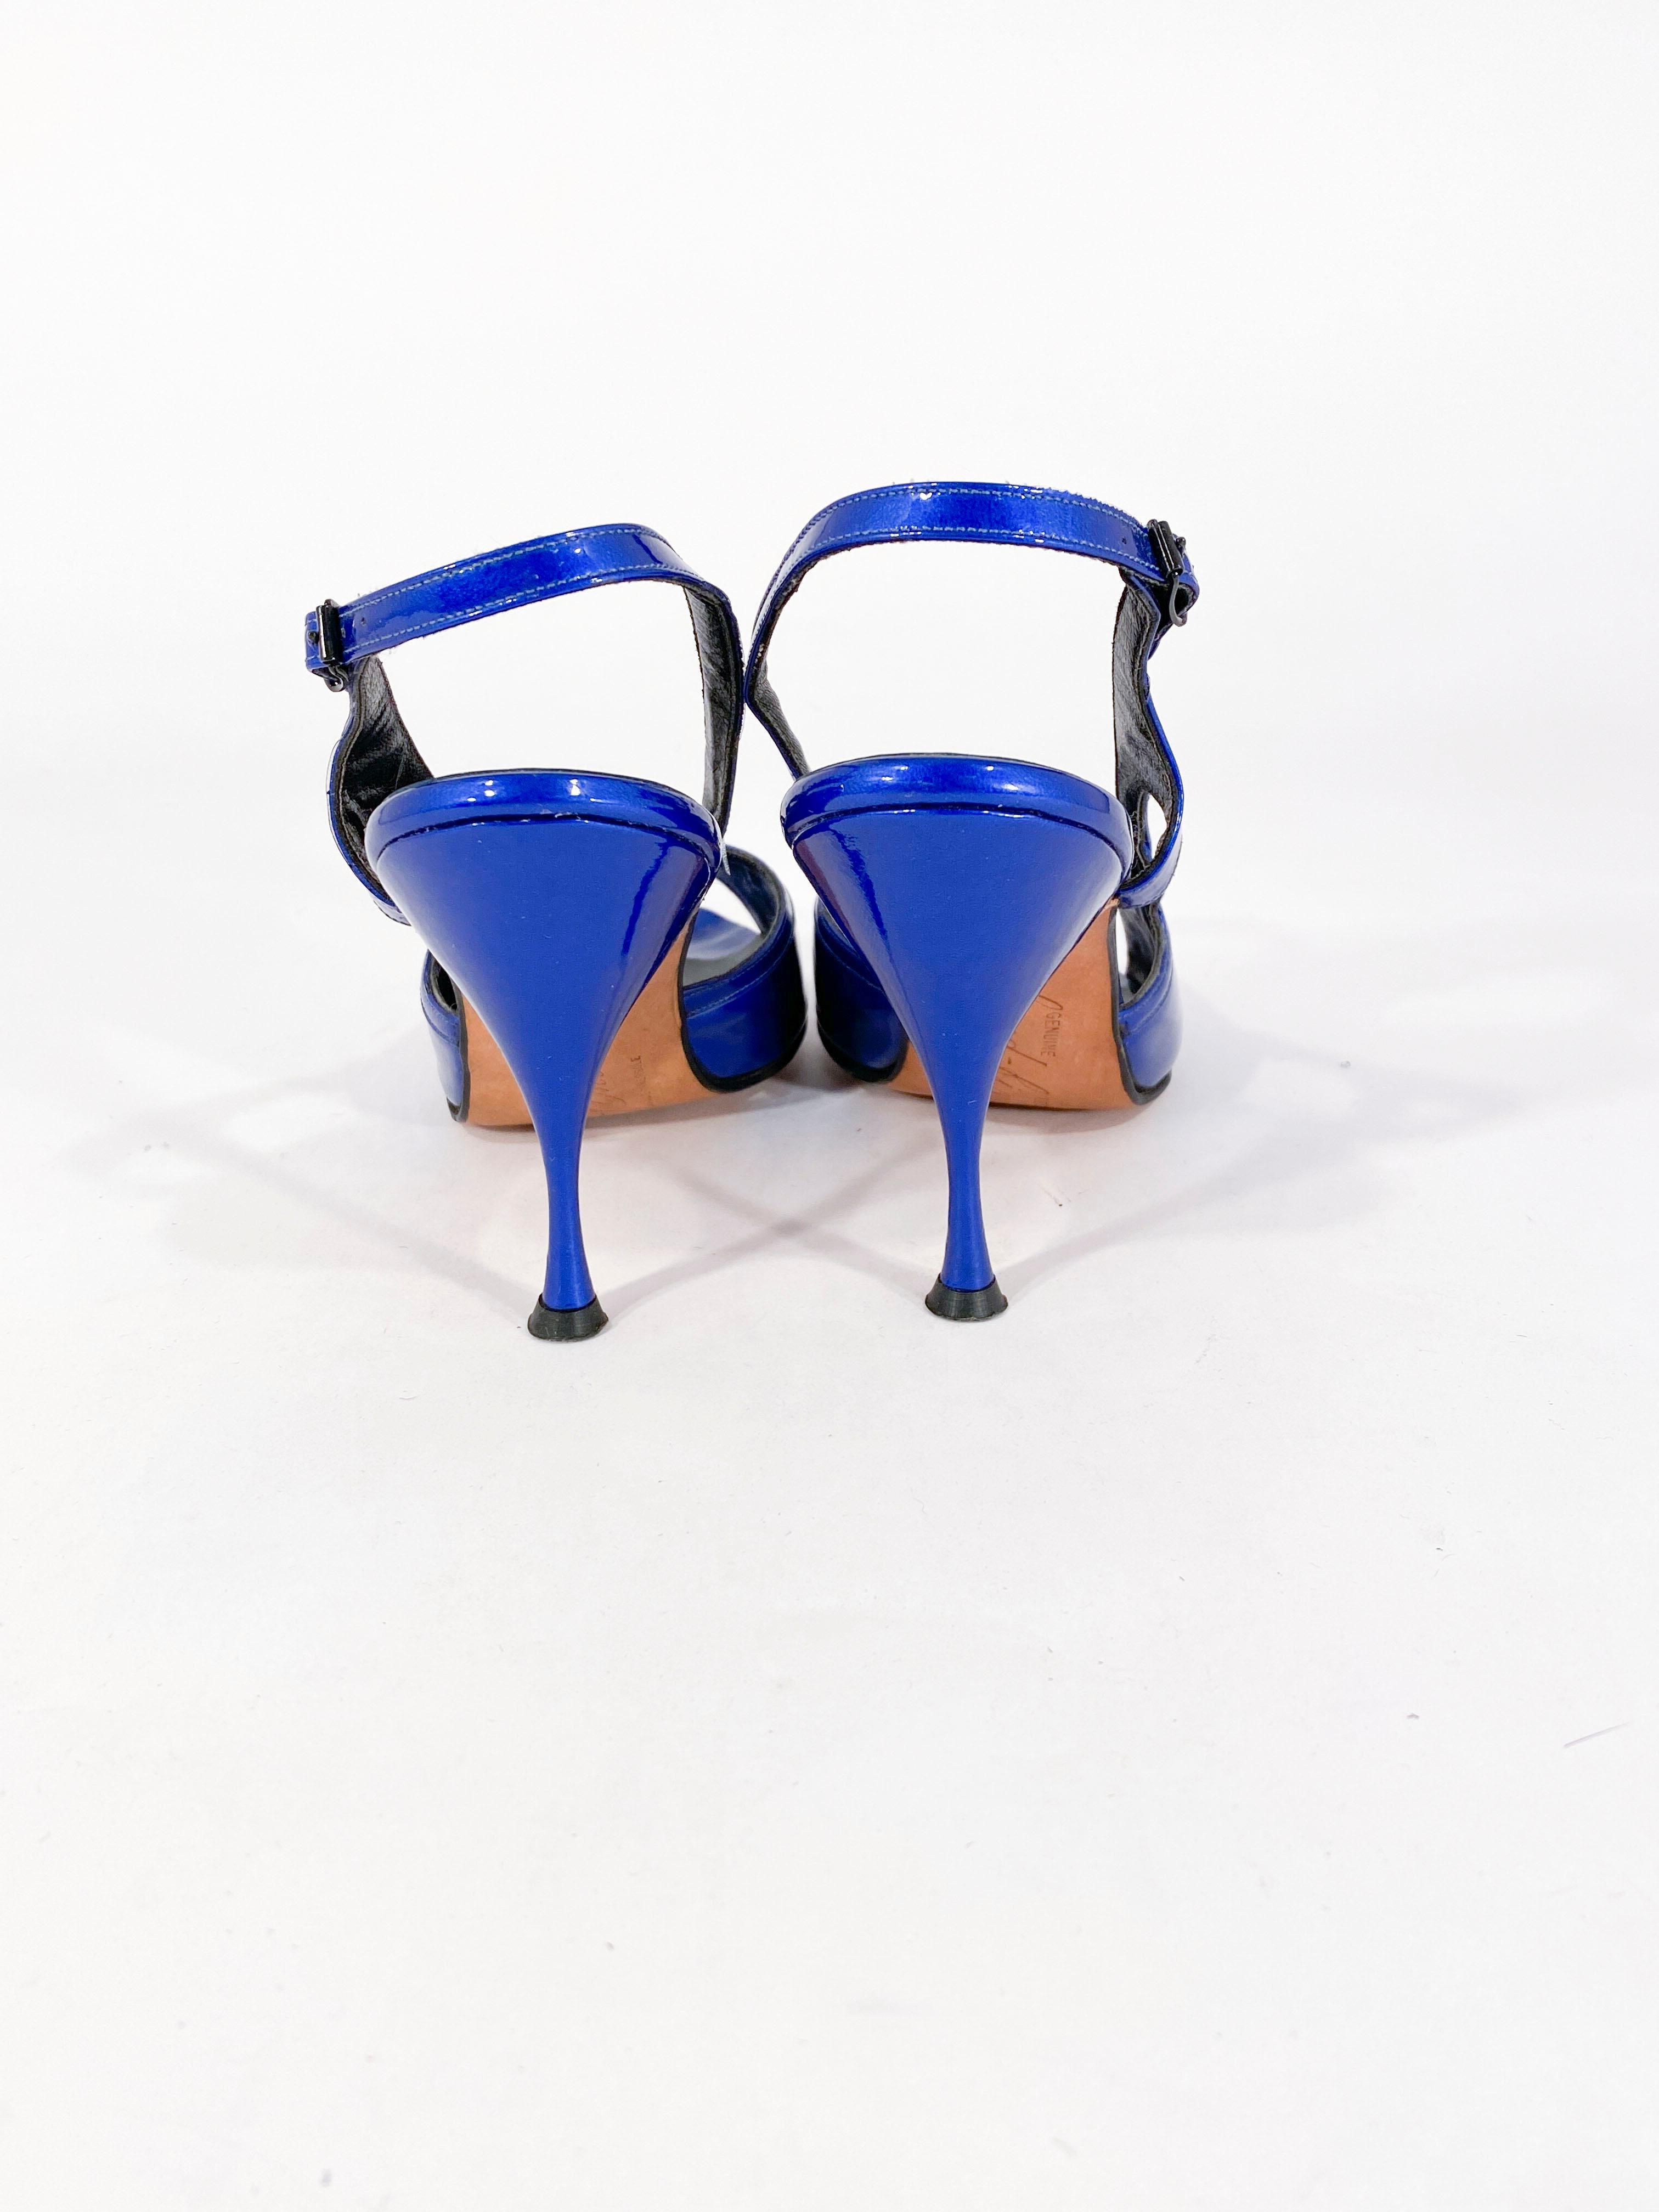 royal blue patent leather shoes